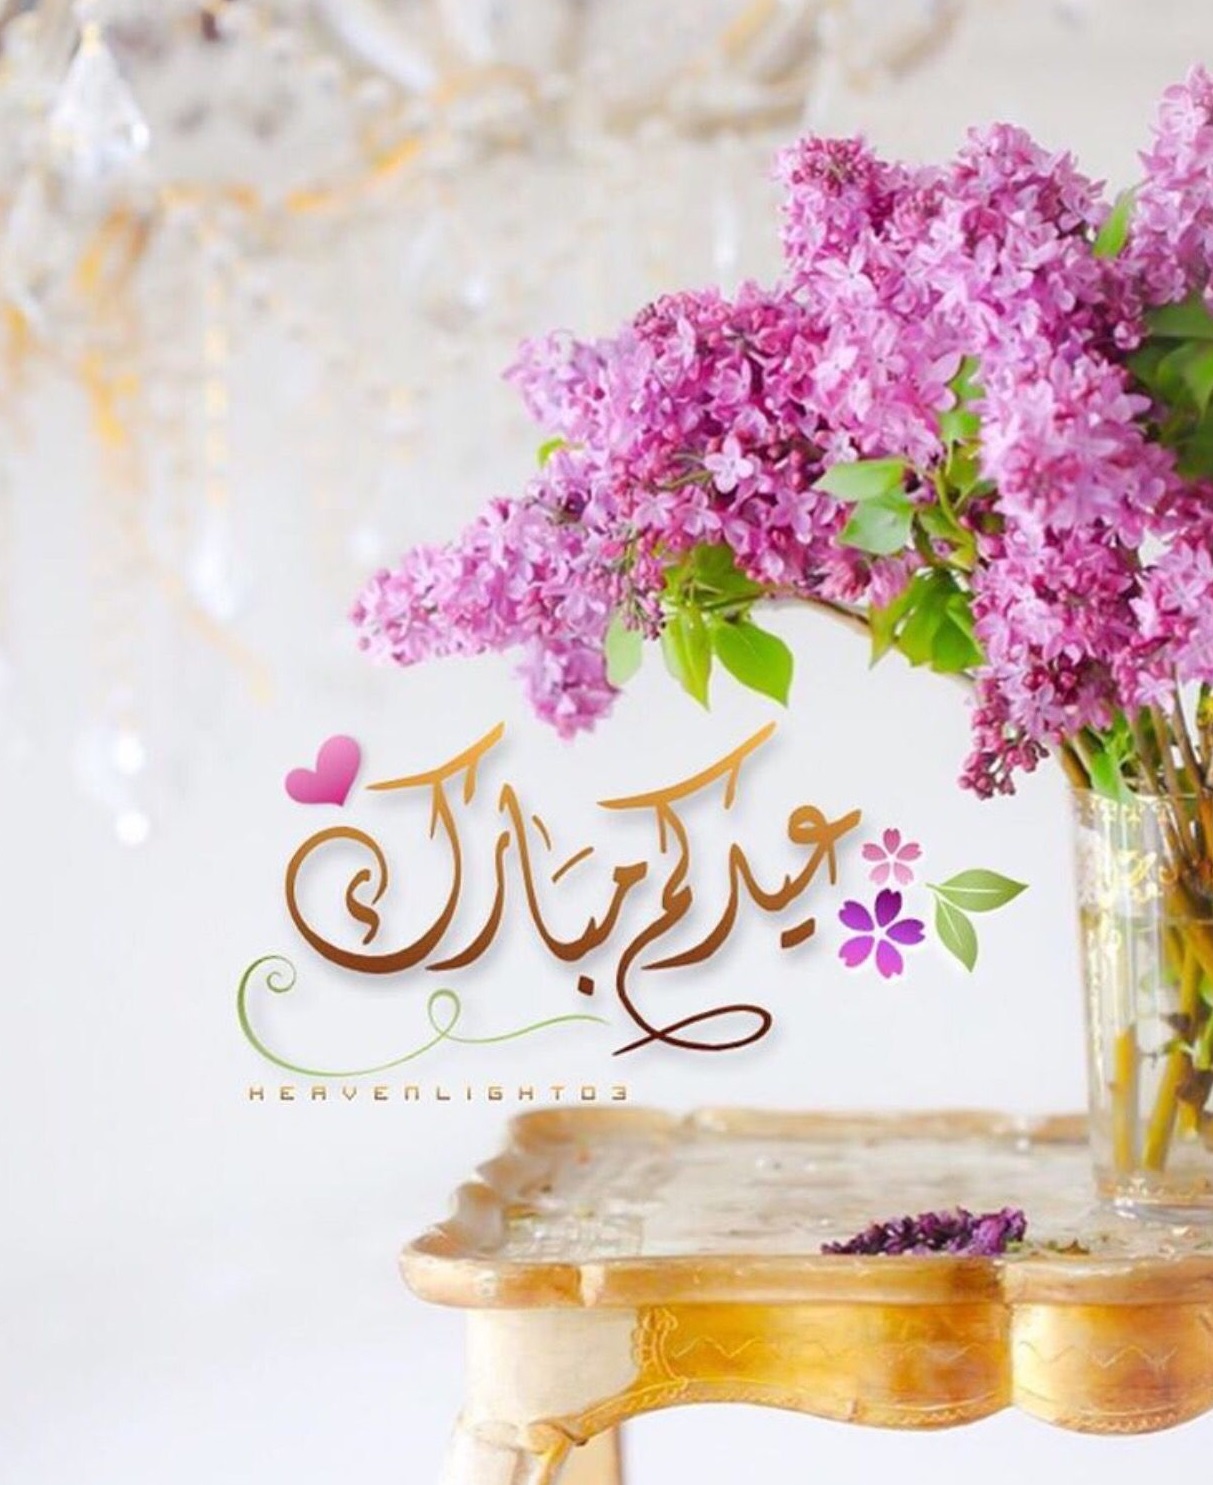 The most beautiful messages of congratulations Eid Al-Fitr 2022